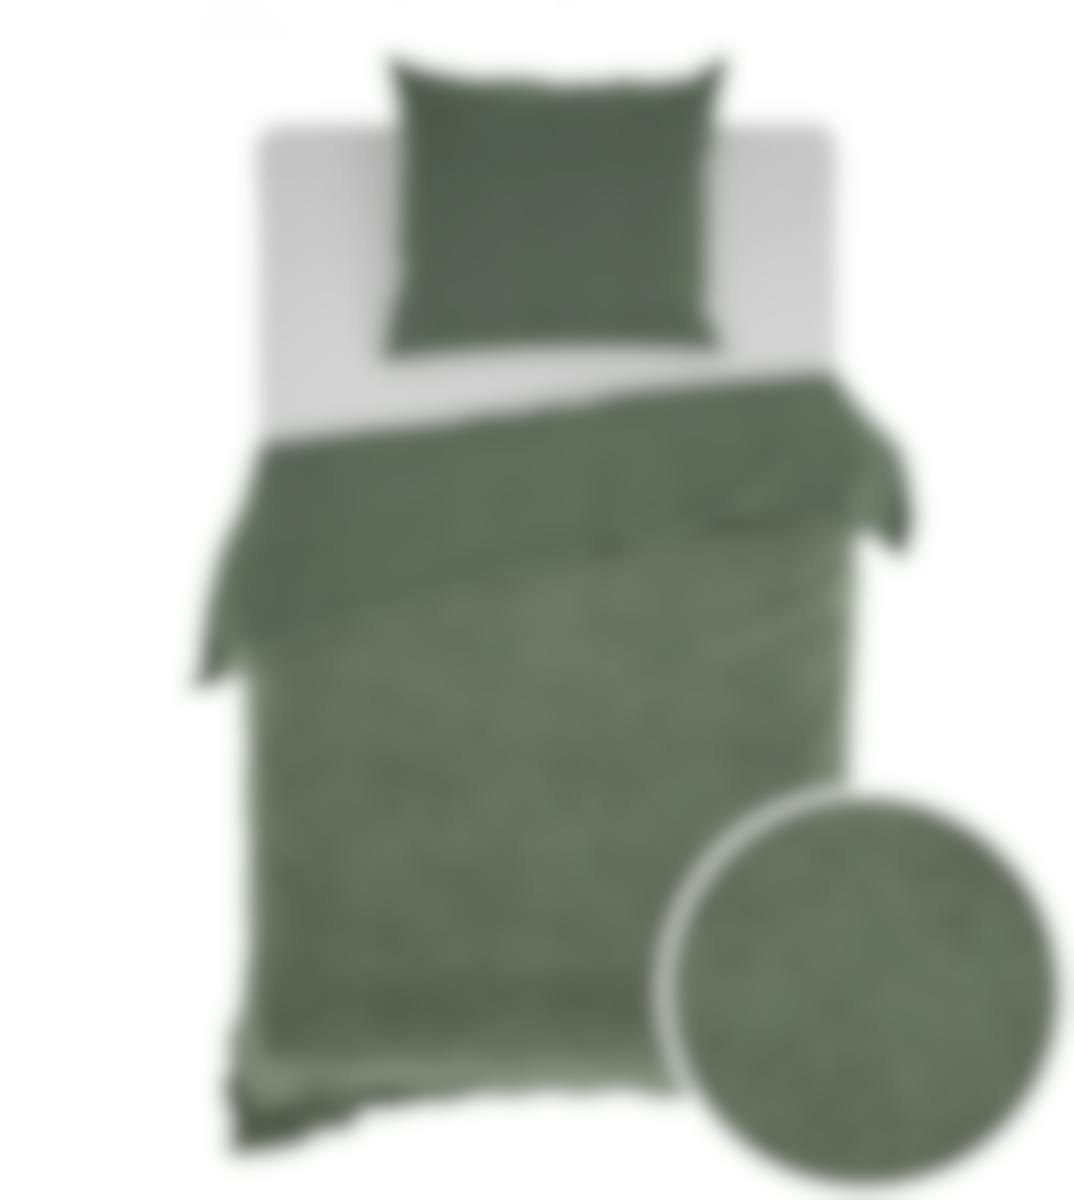 Zo! Home housse de couette Velluto Army Green Velours 140 x 200-220 cm